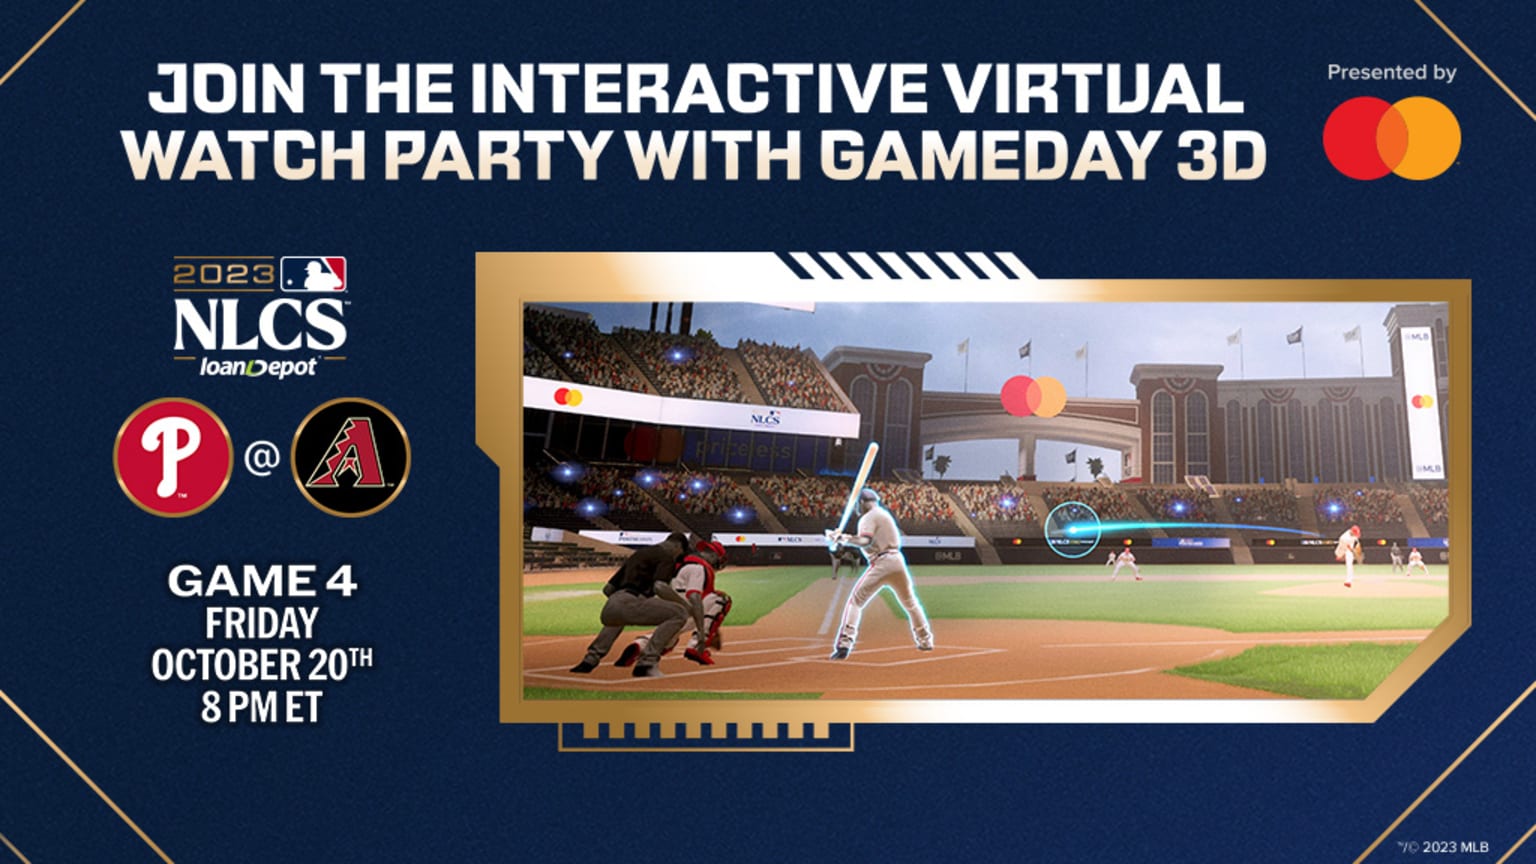 Join the interactive virtual watch party with Gameday 3D